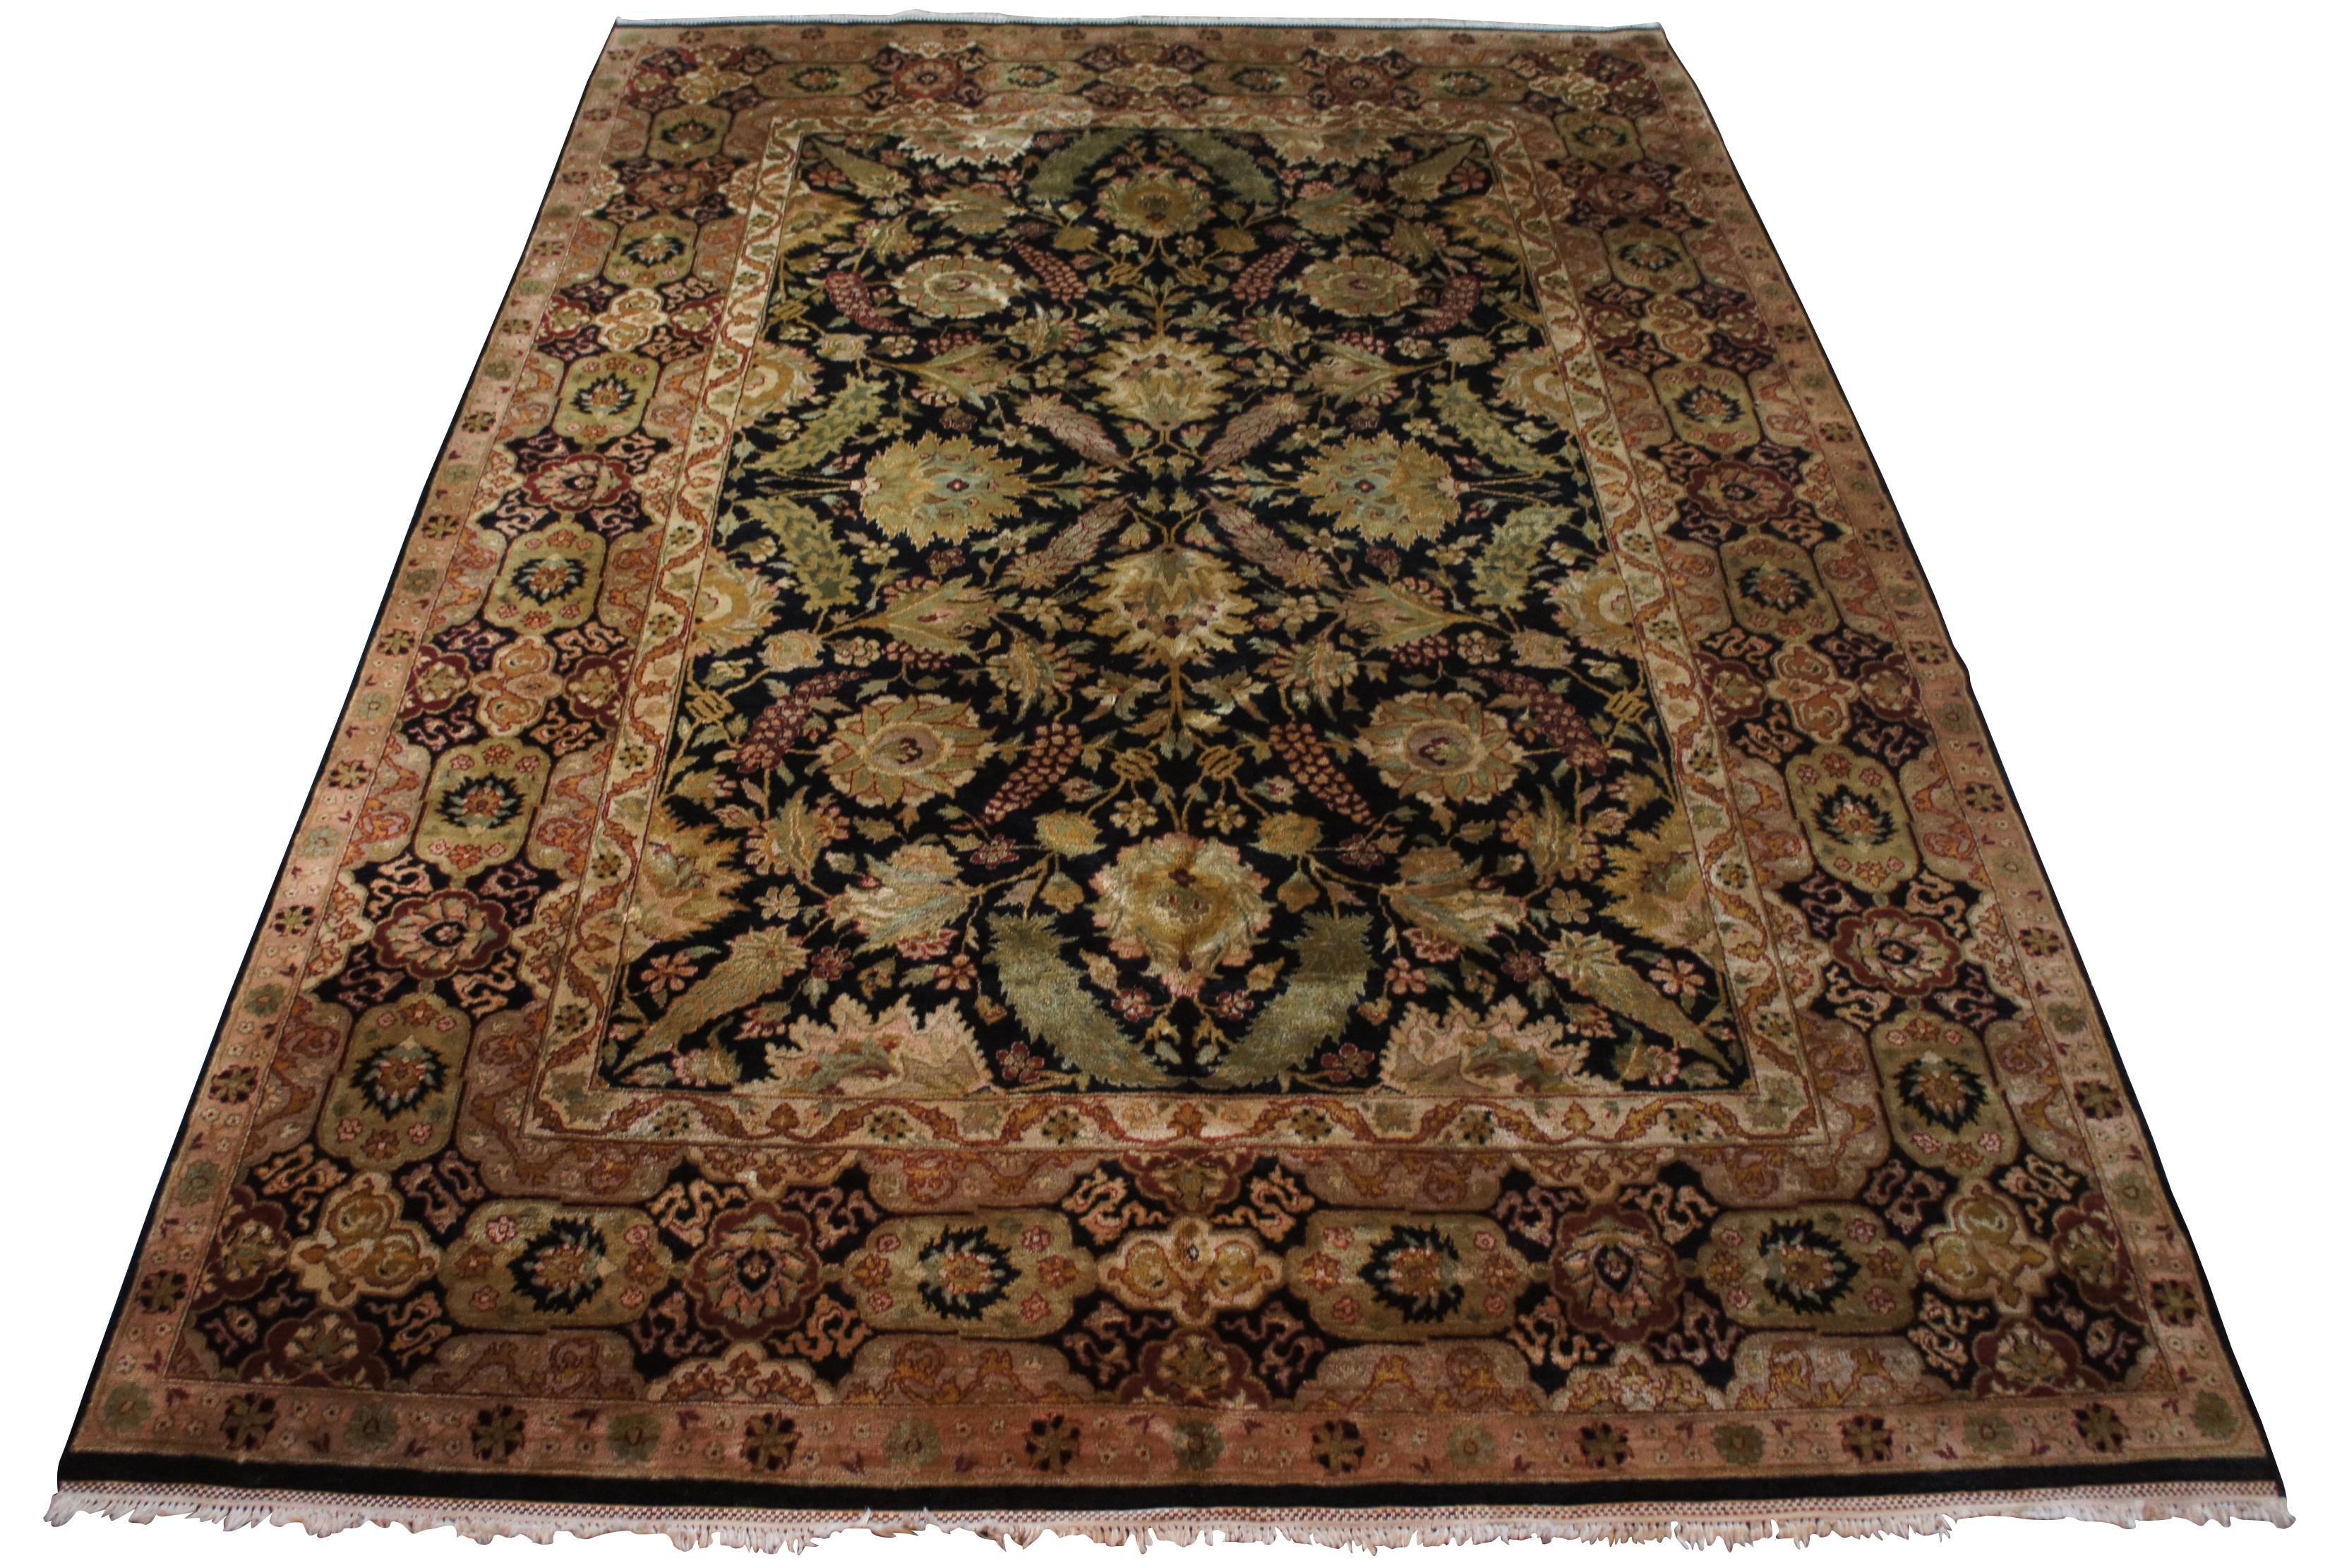 Vintage machine made area rug carpet featuring floral design with black field and flowers / pinecones with greens, tans, gold, pink, reds and grey. Measures: 10' x 14'.
  